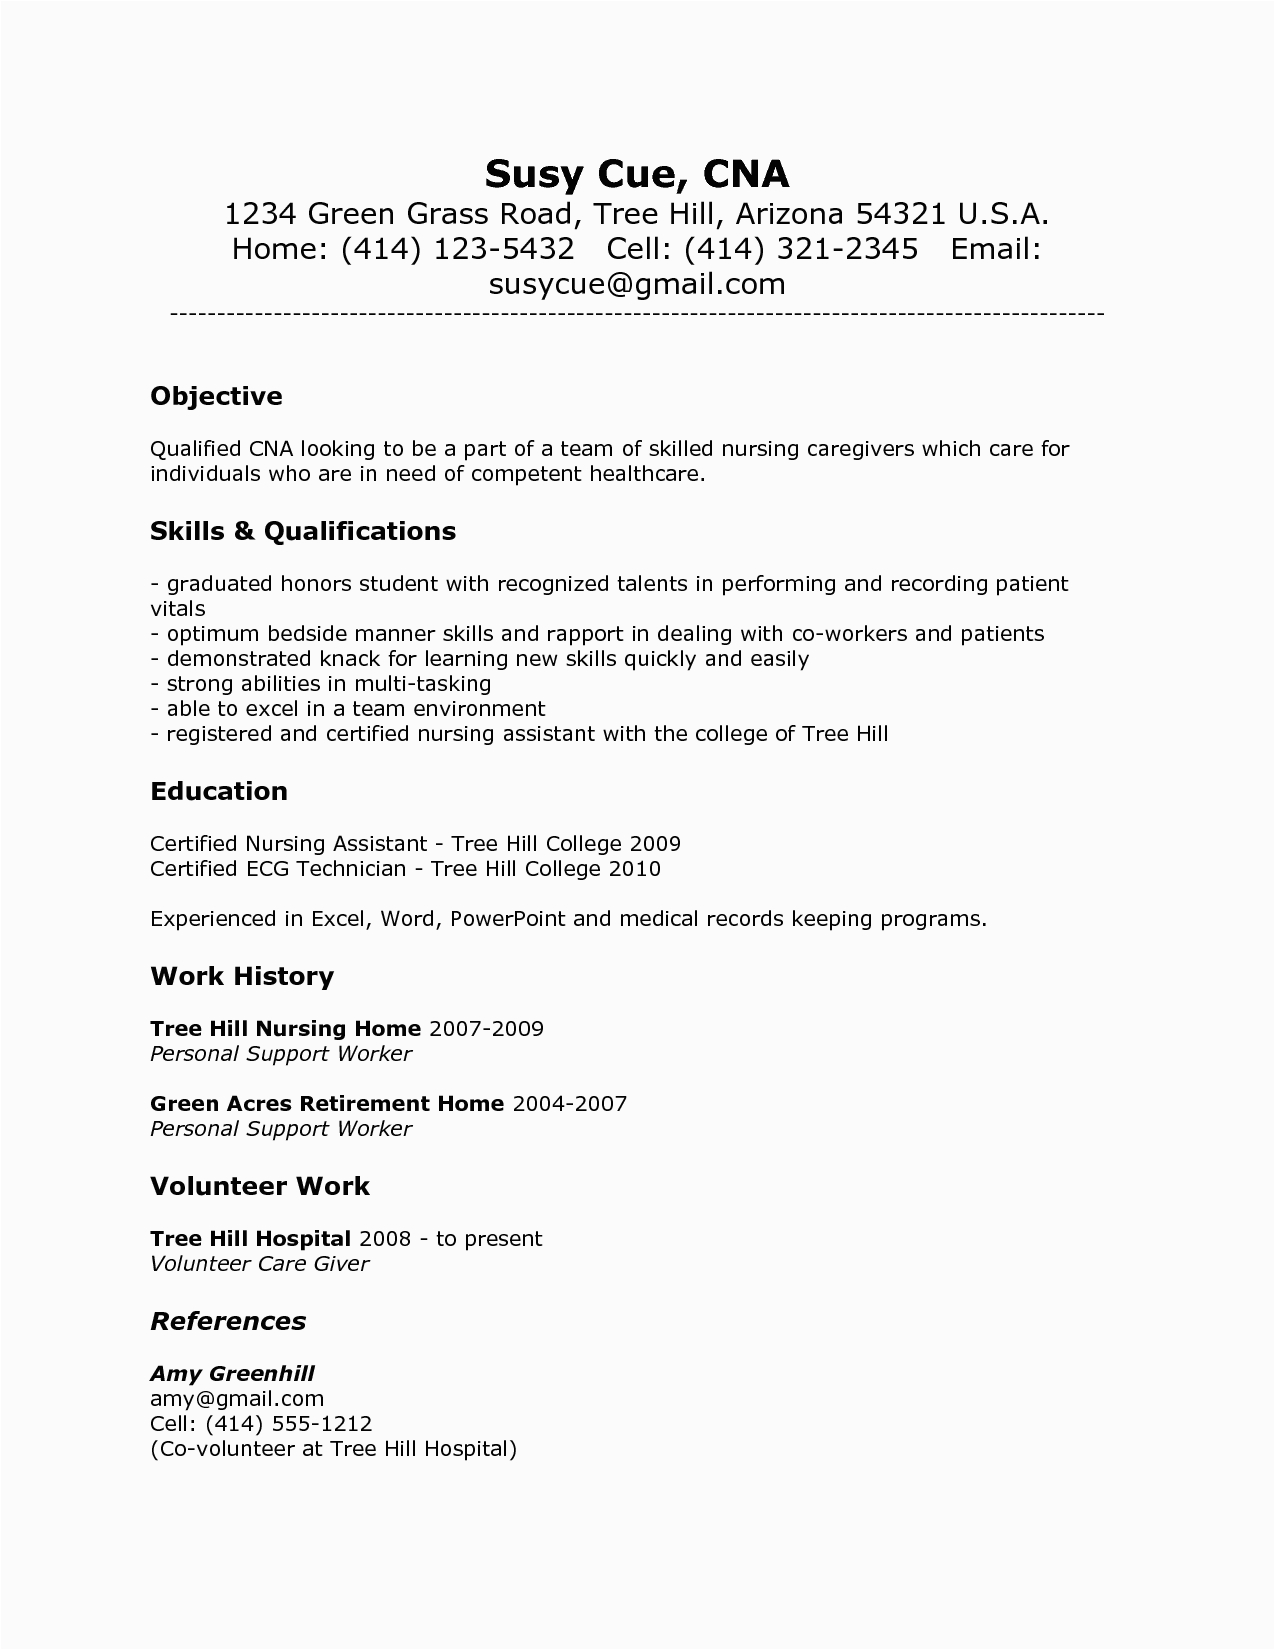 Sample Resume for Cna with No Previous Experience Cna Resume Sample